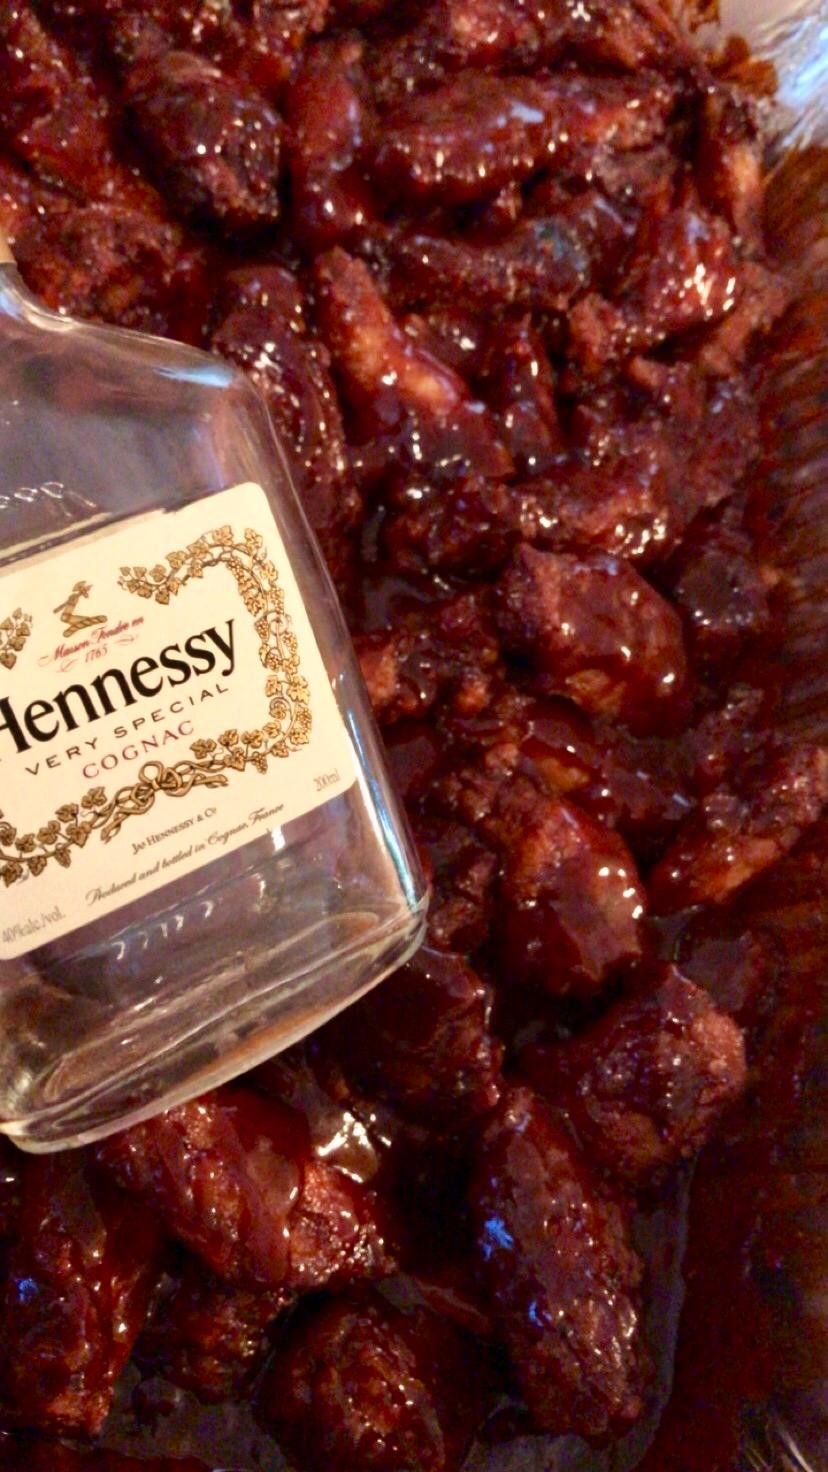 Small Hennessy Wingettes